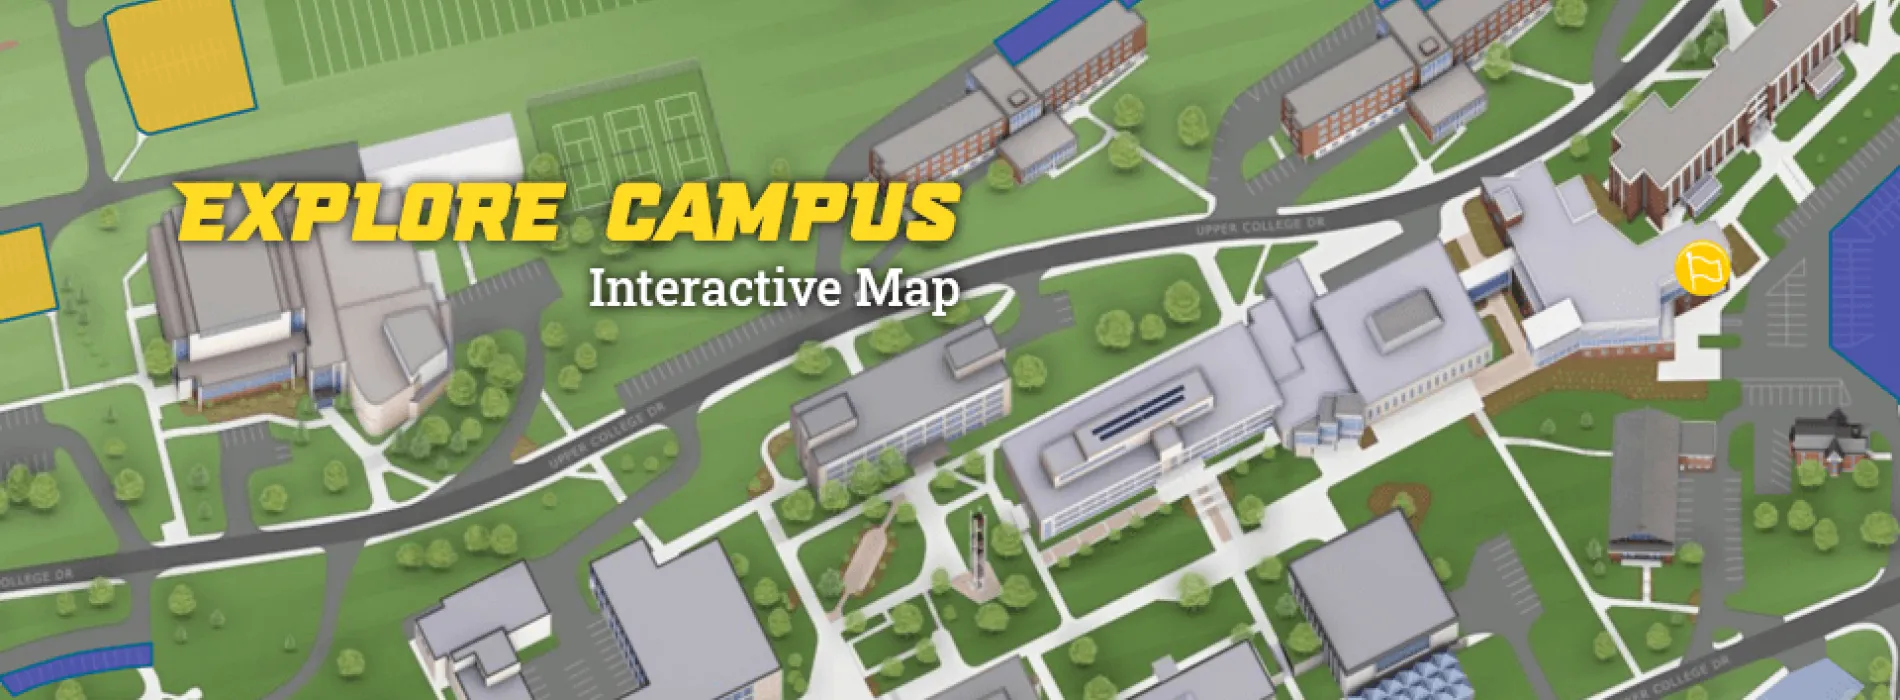 Link to interactive campus map. Explore Campus Interactive map. Image of map.